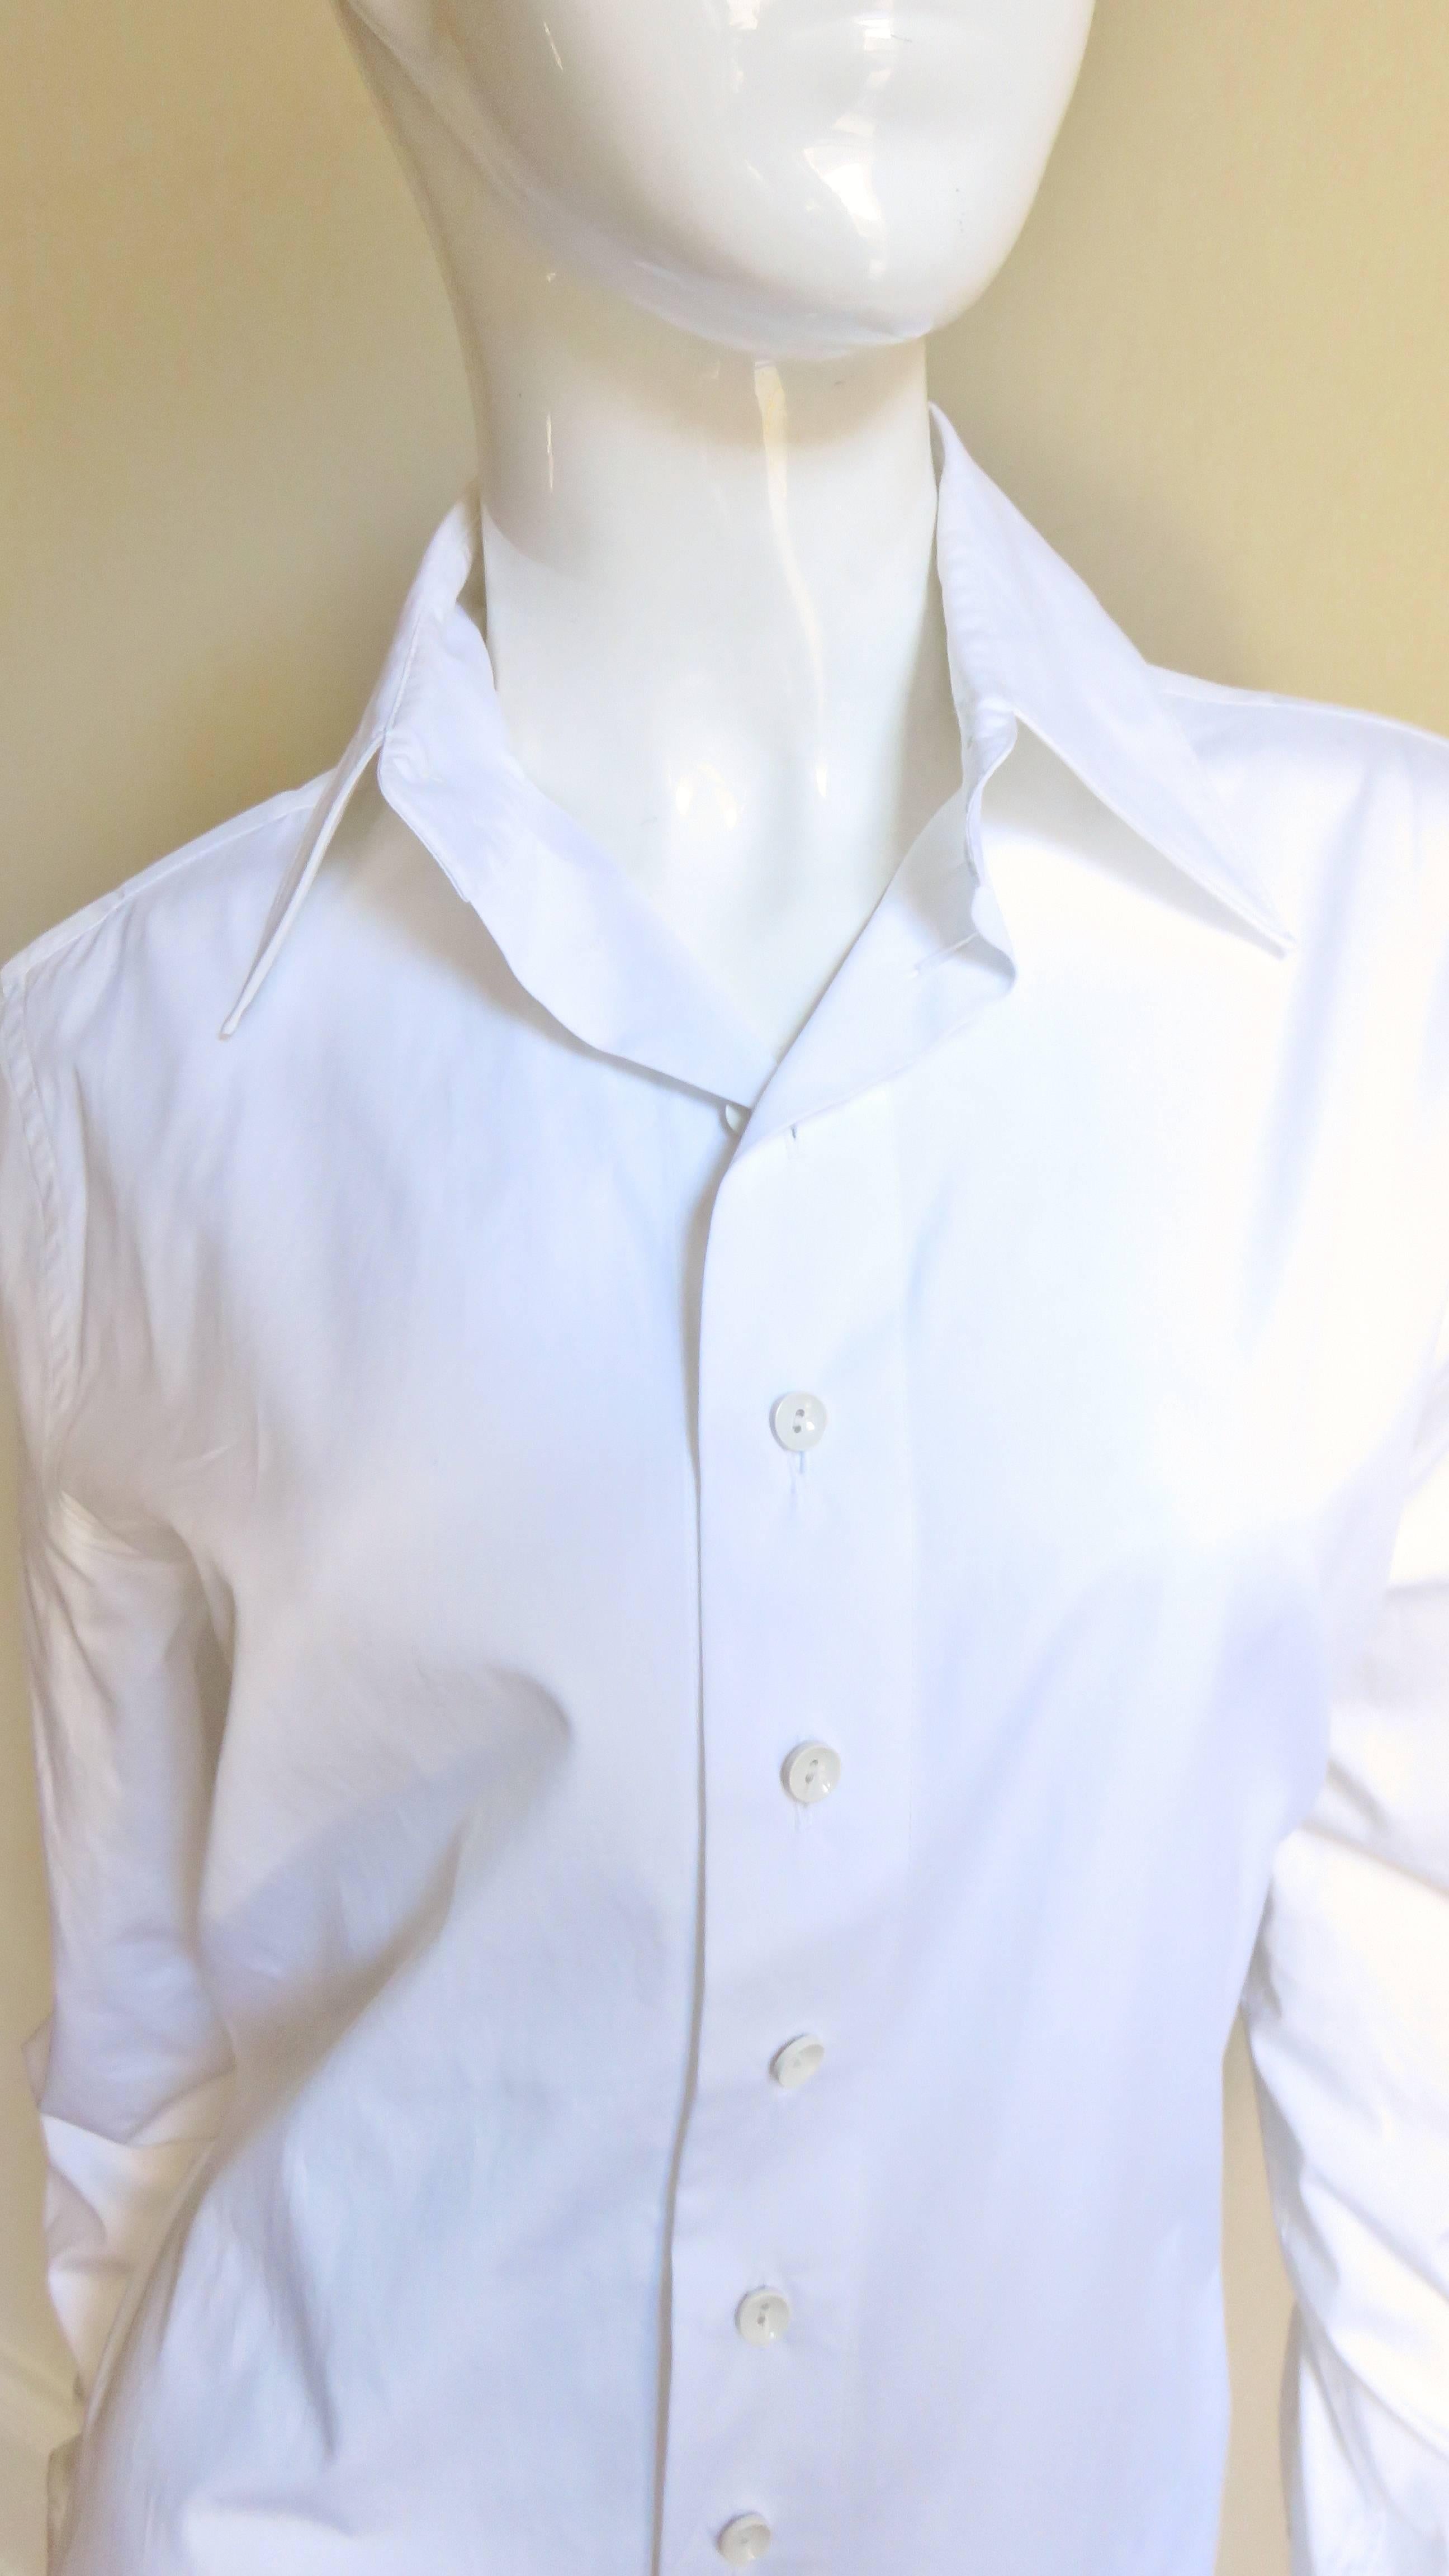 A fabuous white cotton shirt from Jean Paul Gaultier. It is a typical button up front collared long sleeve button cuff shirt with tails but has back drama of an adjustable black stretch band that crosses the waist and back.
Excellent, appears